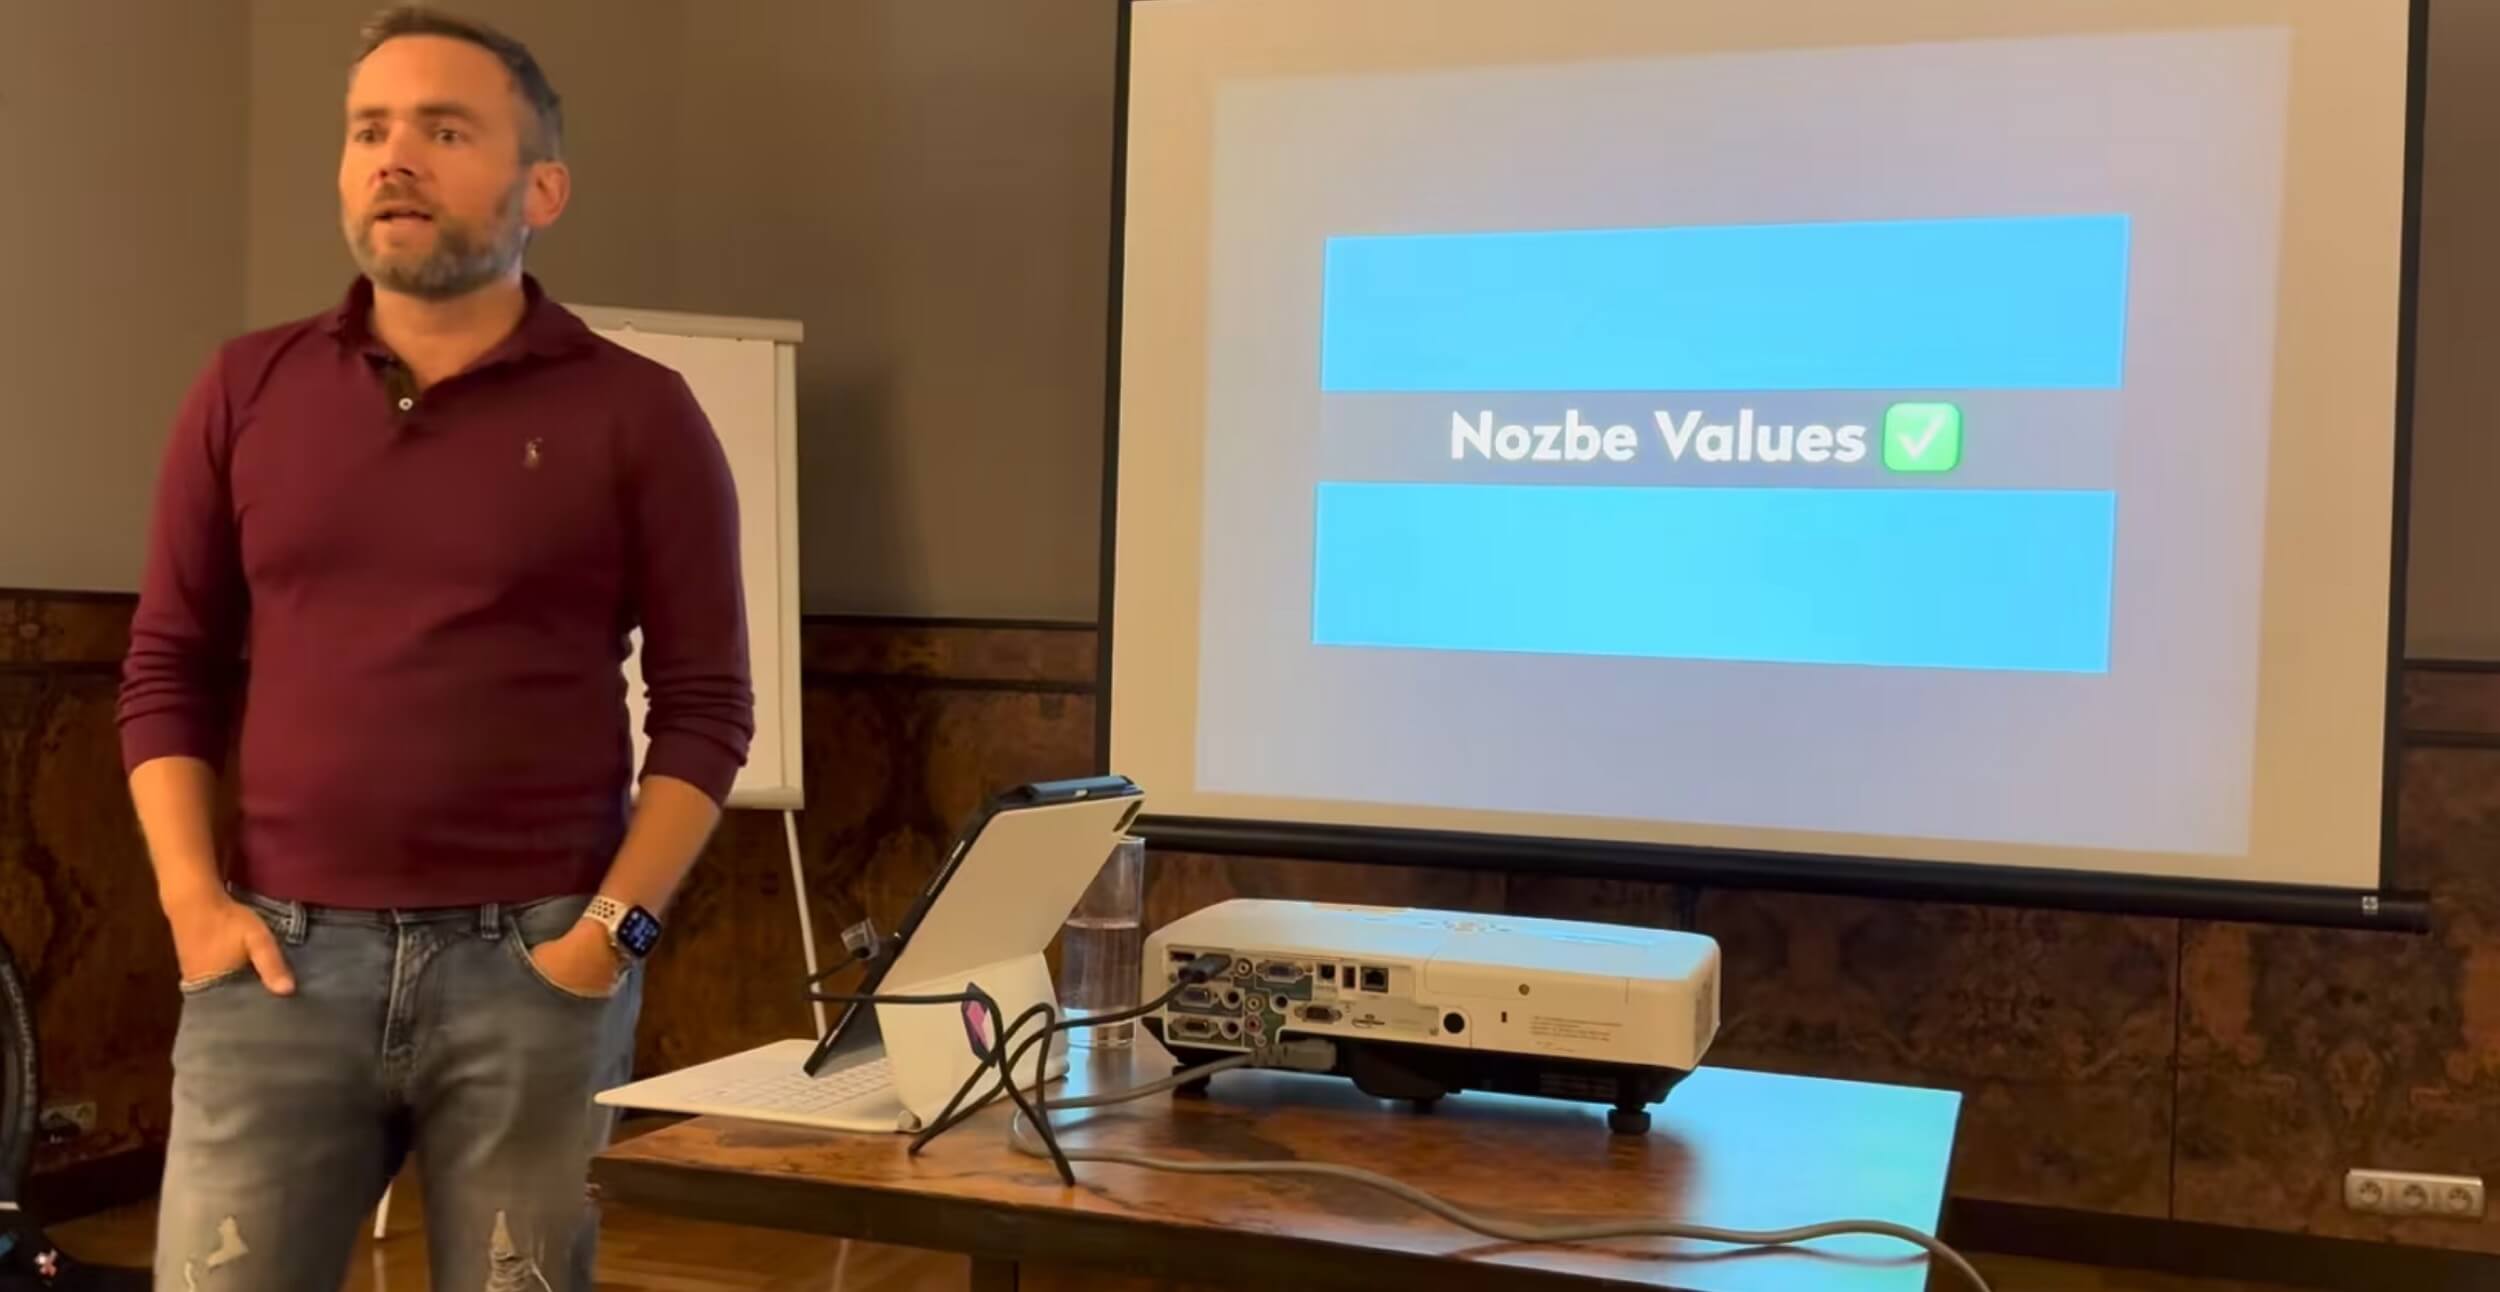 Nozbe Core Values: Passion, Simplicity, Freedom and Fairness